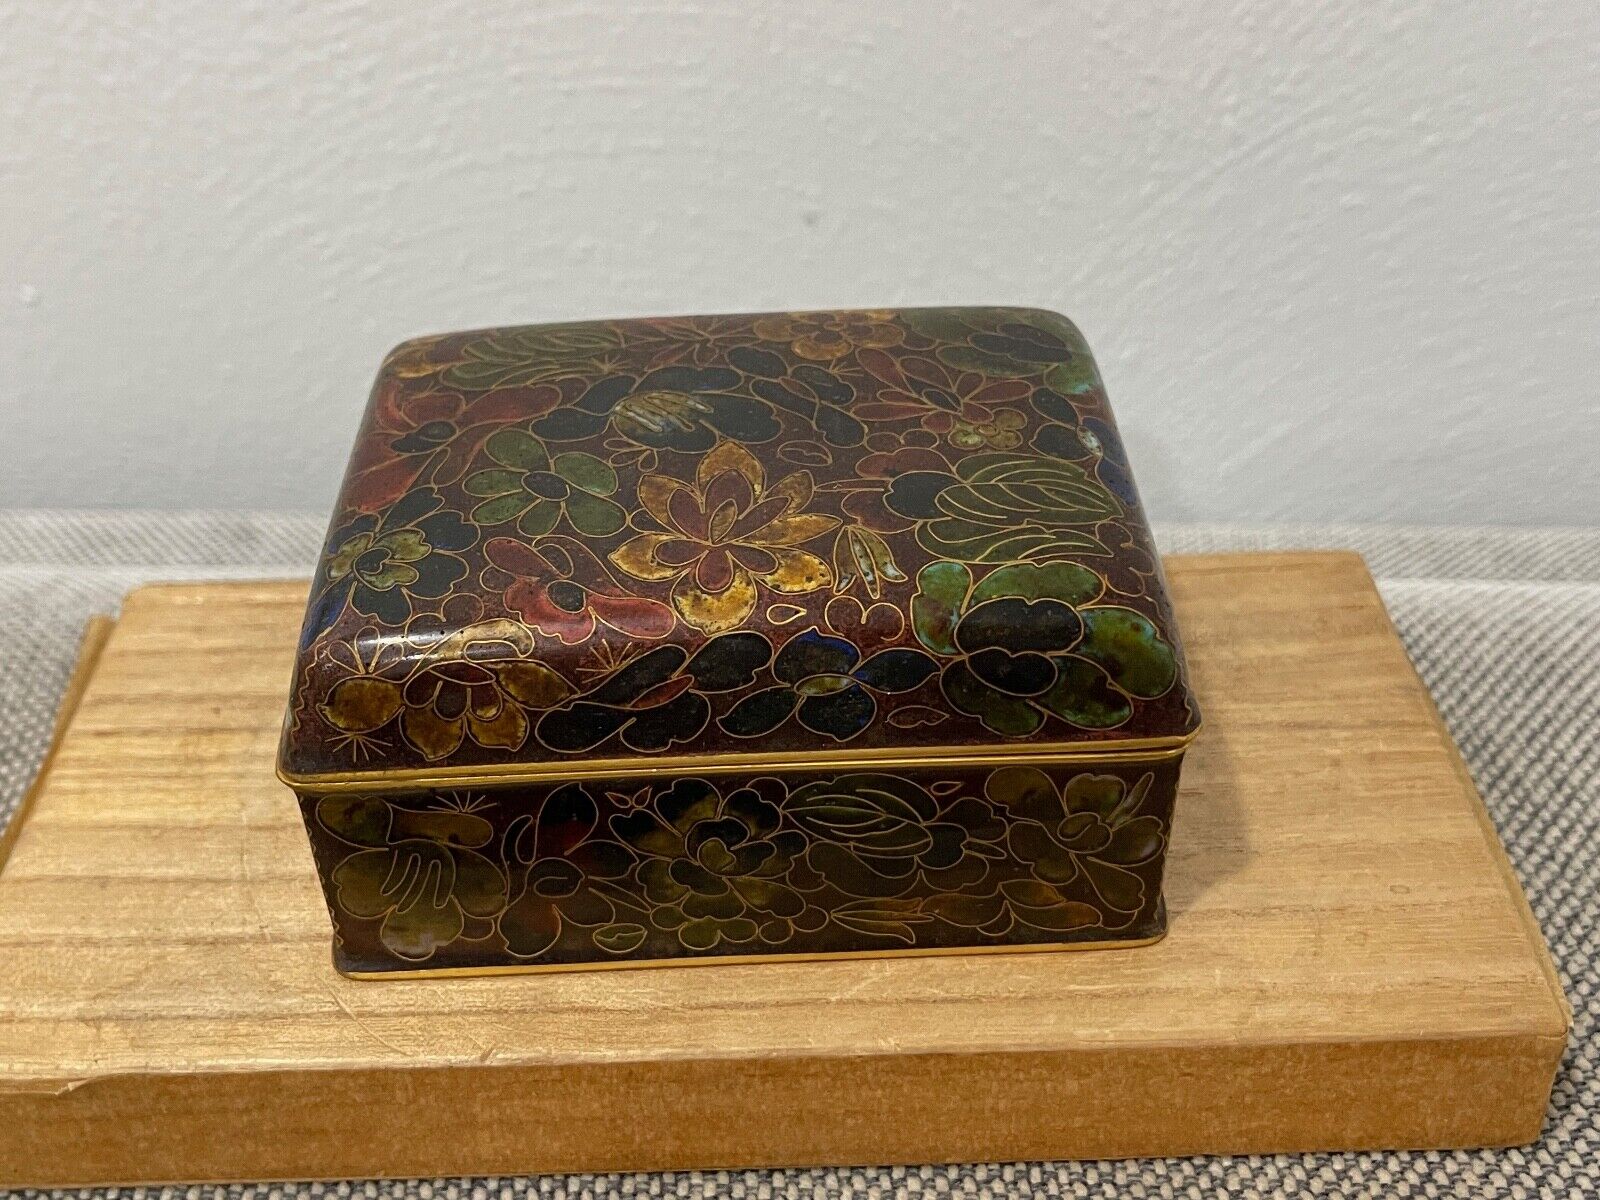 Vintage Chinese Cloisonne Small Box Brownish Red & Green w/ Flowers Decoration